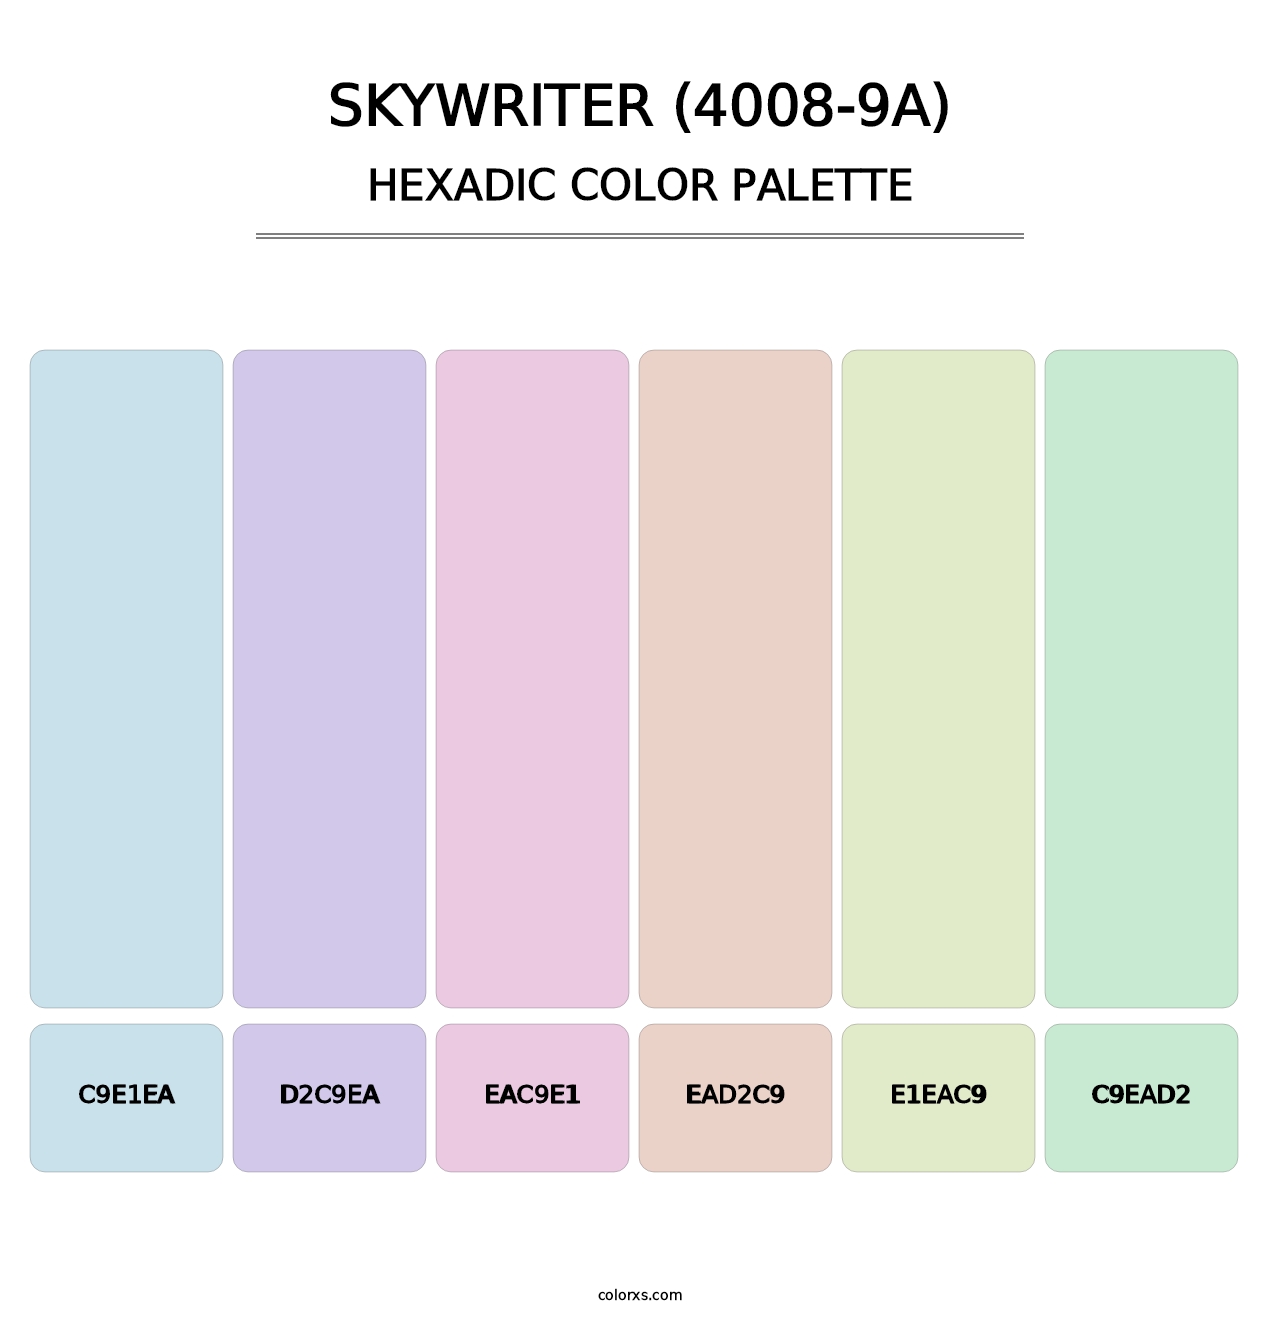 Skywriter (4008-9A) - Hexadic Color Palette